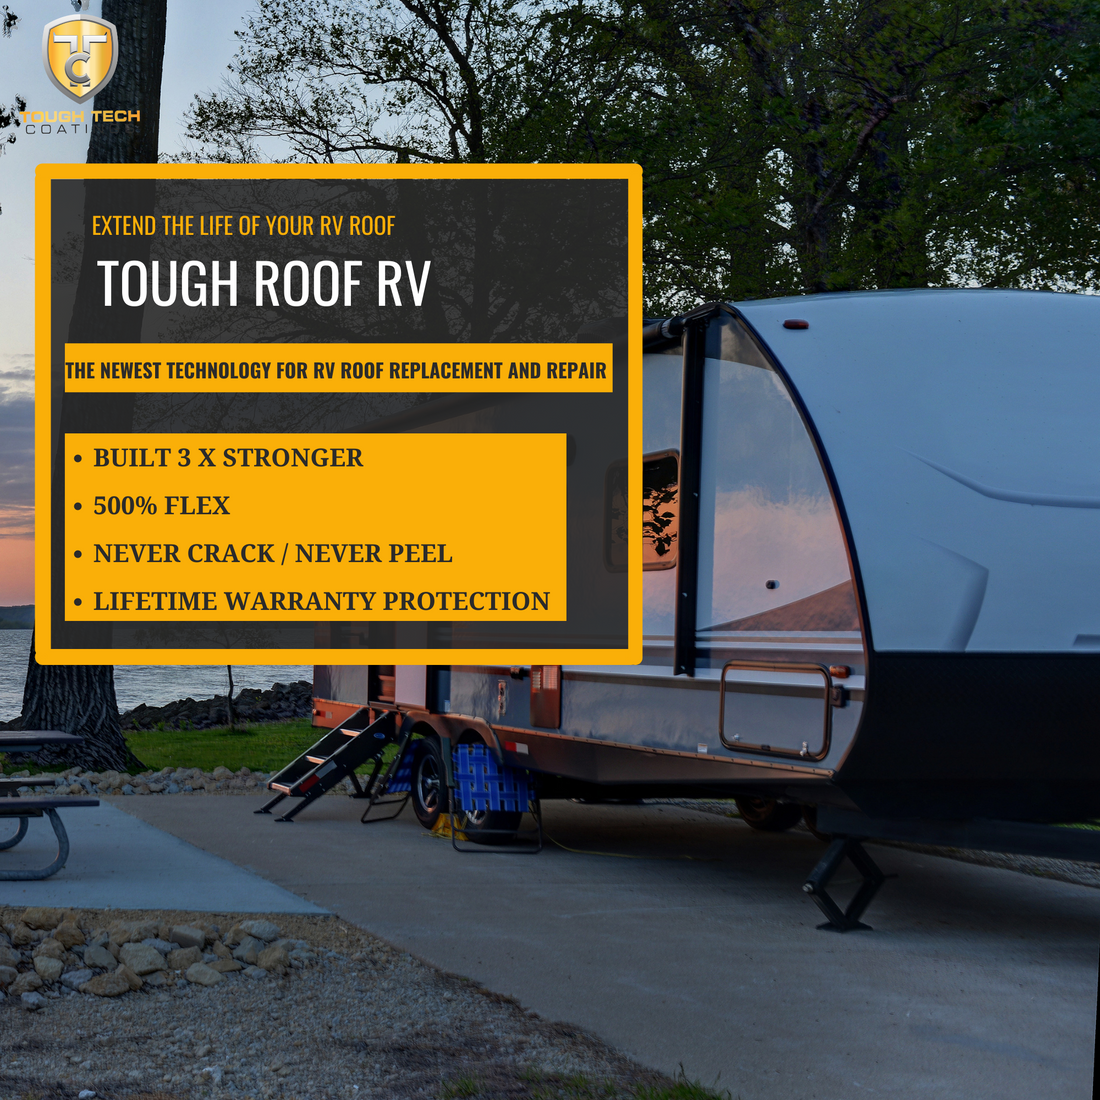 Ultimate DIY Guide to RV Roof Repair and Coating Your RV's Roof